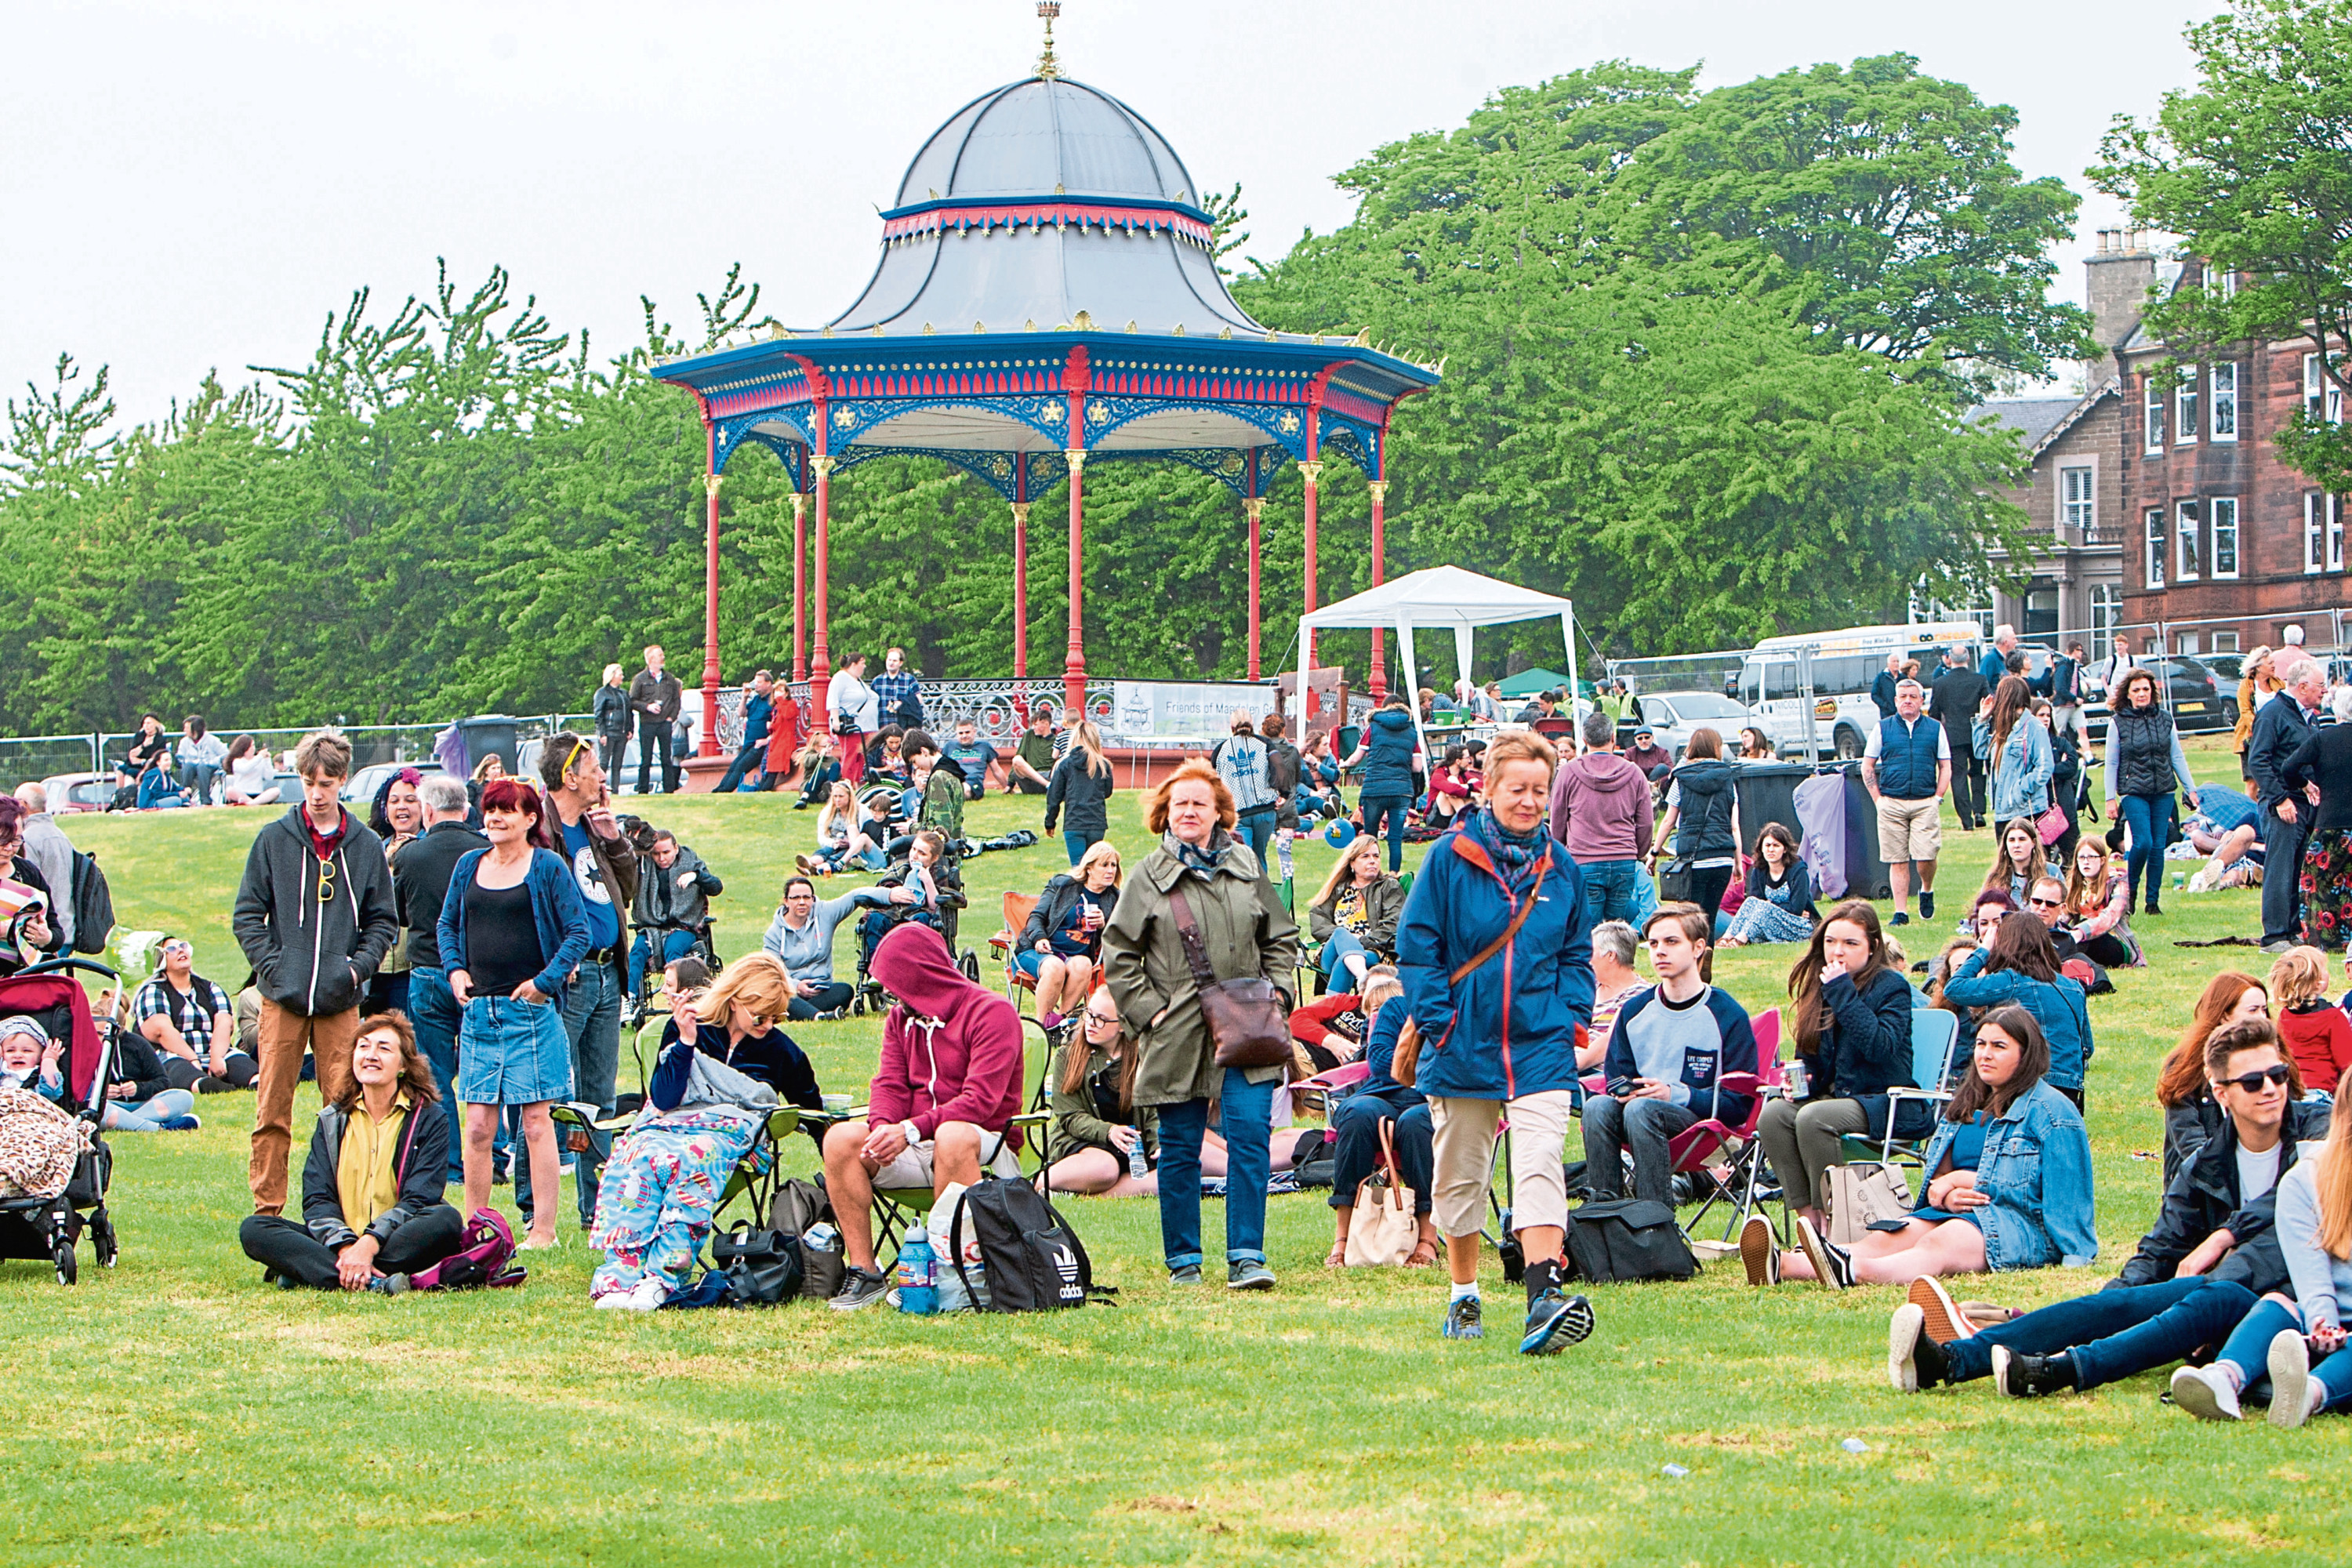 Dundee residents claim WestFest forces them out of their homes so want